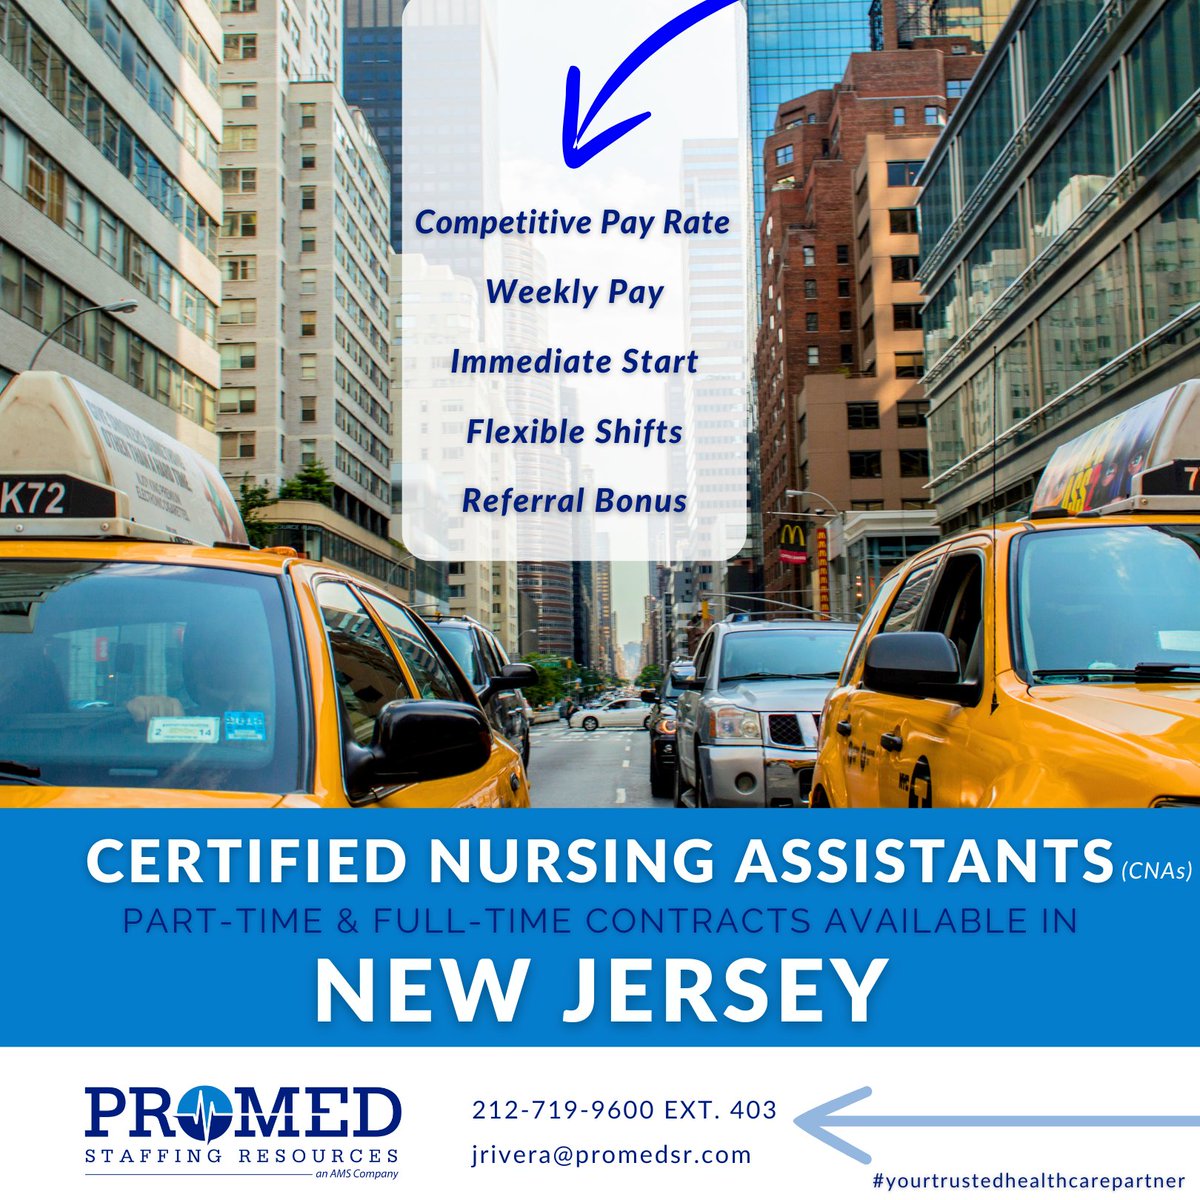 #CNAs, are you ready for a vibrant new chapter in #newjersey? Connect with Jorell Rivera at (212) 719-9600 or  jrivera@promedsr.com and propel your career forward!

#certifiednursingassisstant #njjobs #longtermcare  #ltc #ltcjobs #recruitmentagency #cnajobs #promed #promedsr